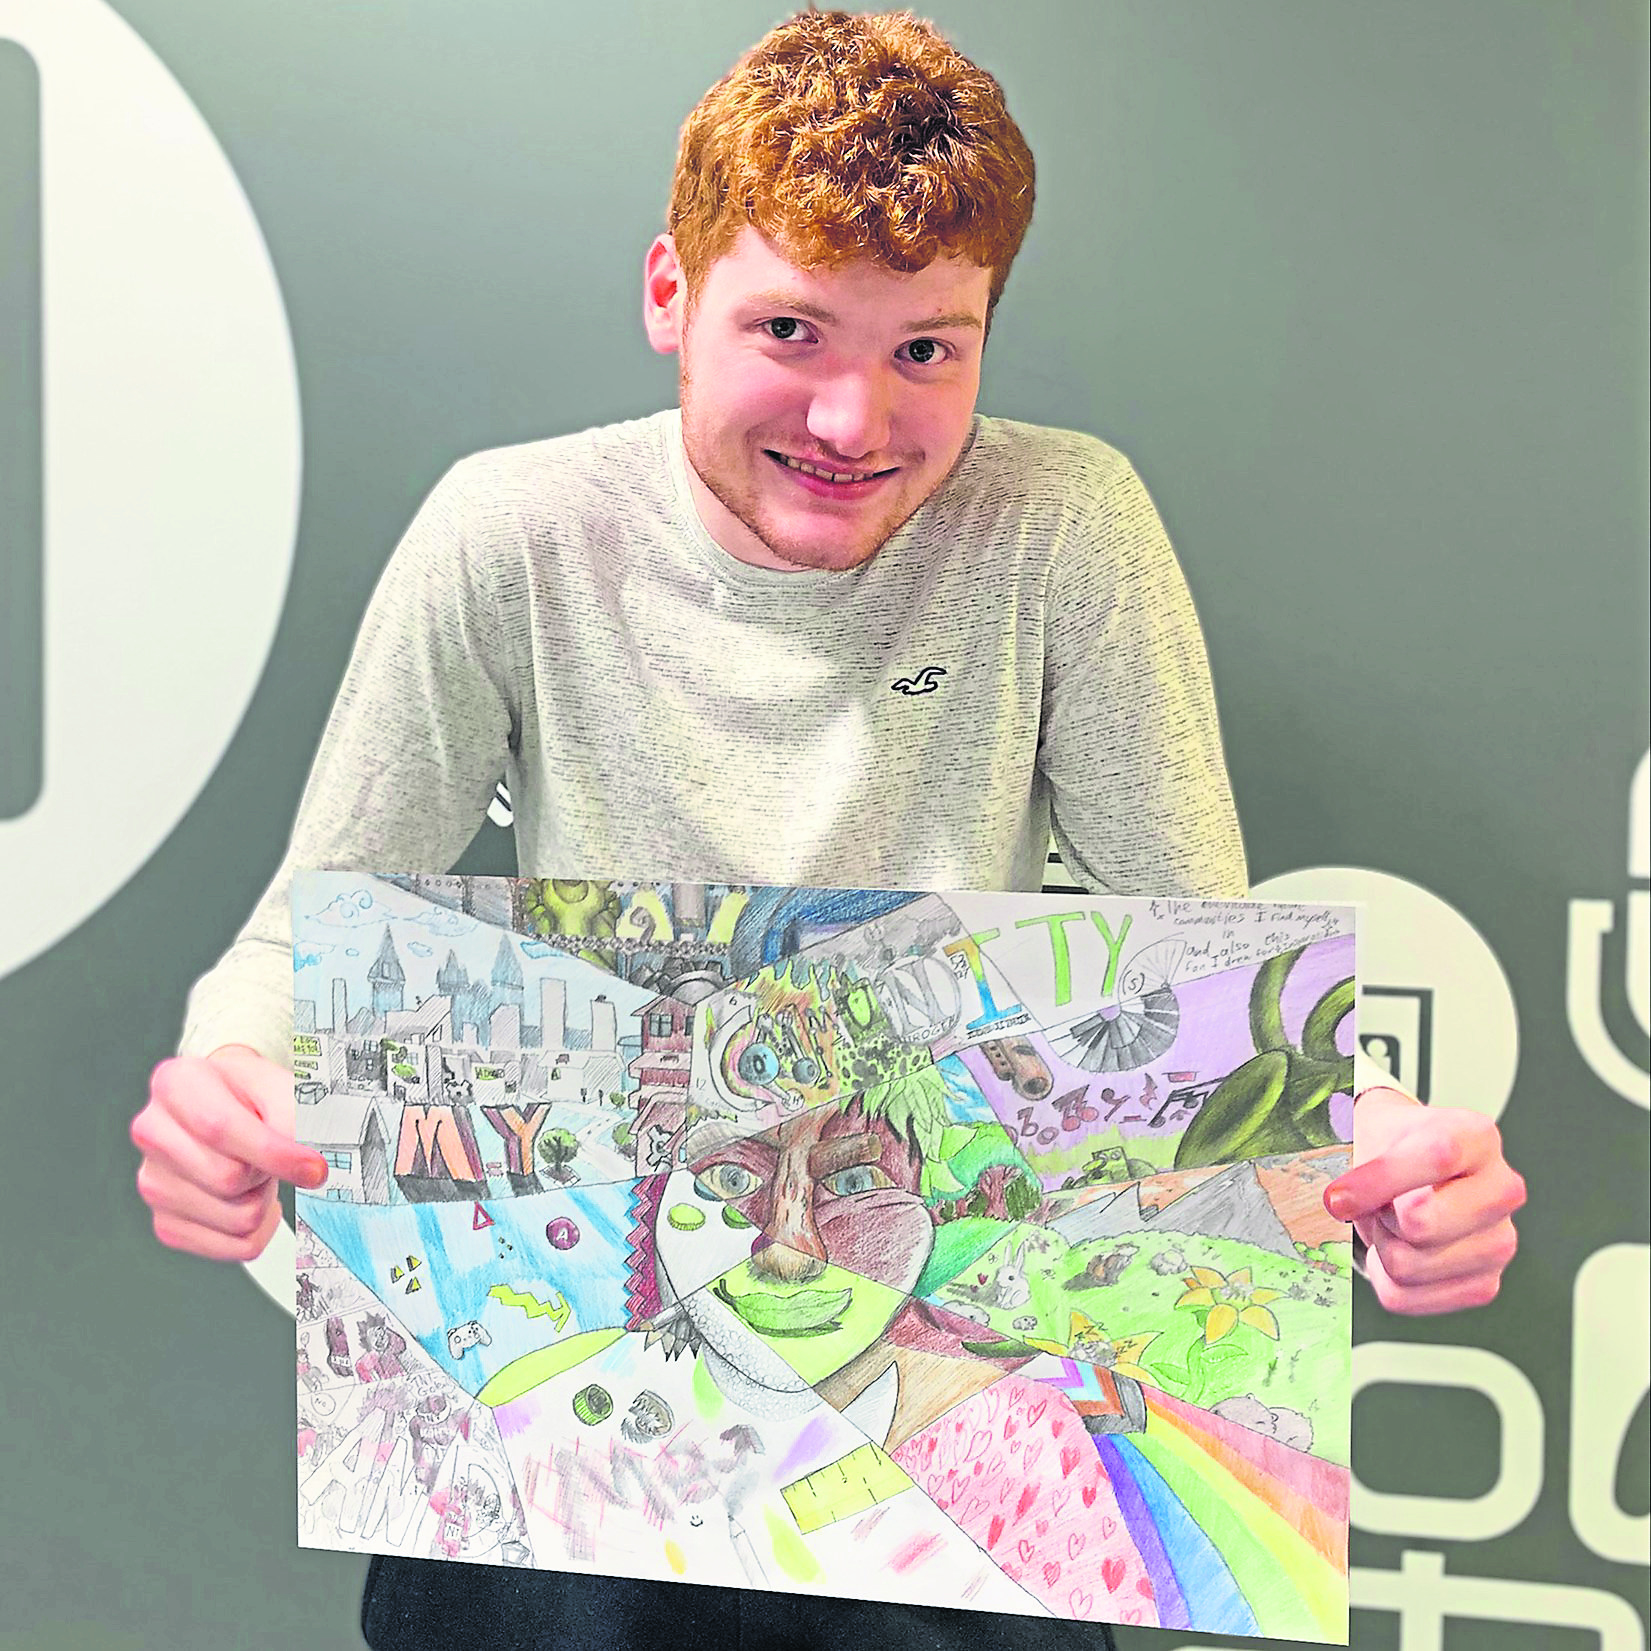 Michael comes runner-up in Credit Union Art Competition